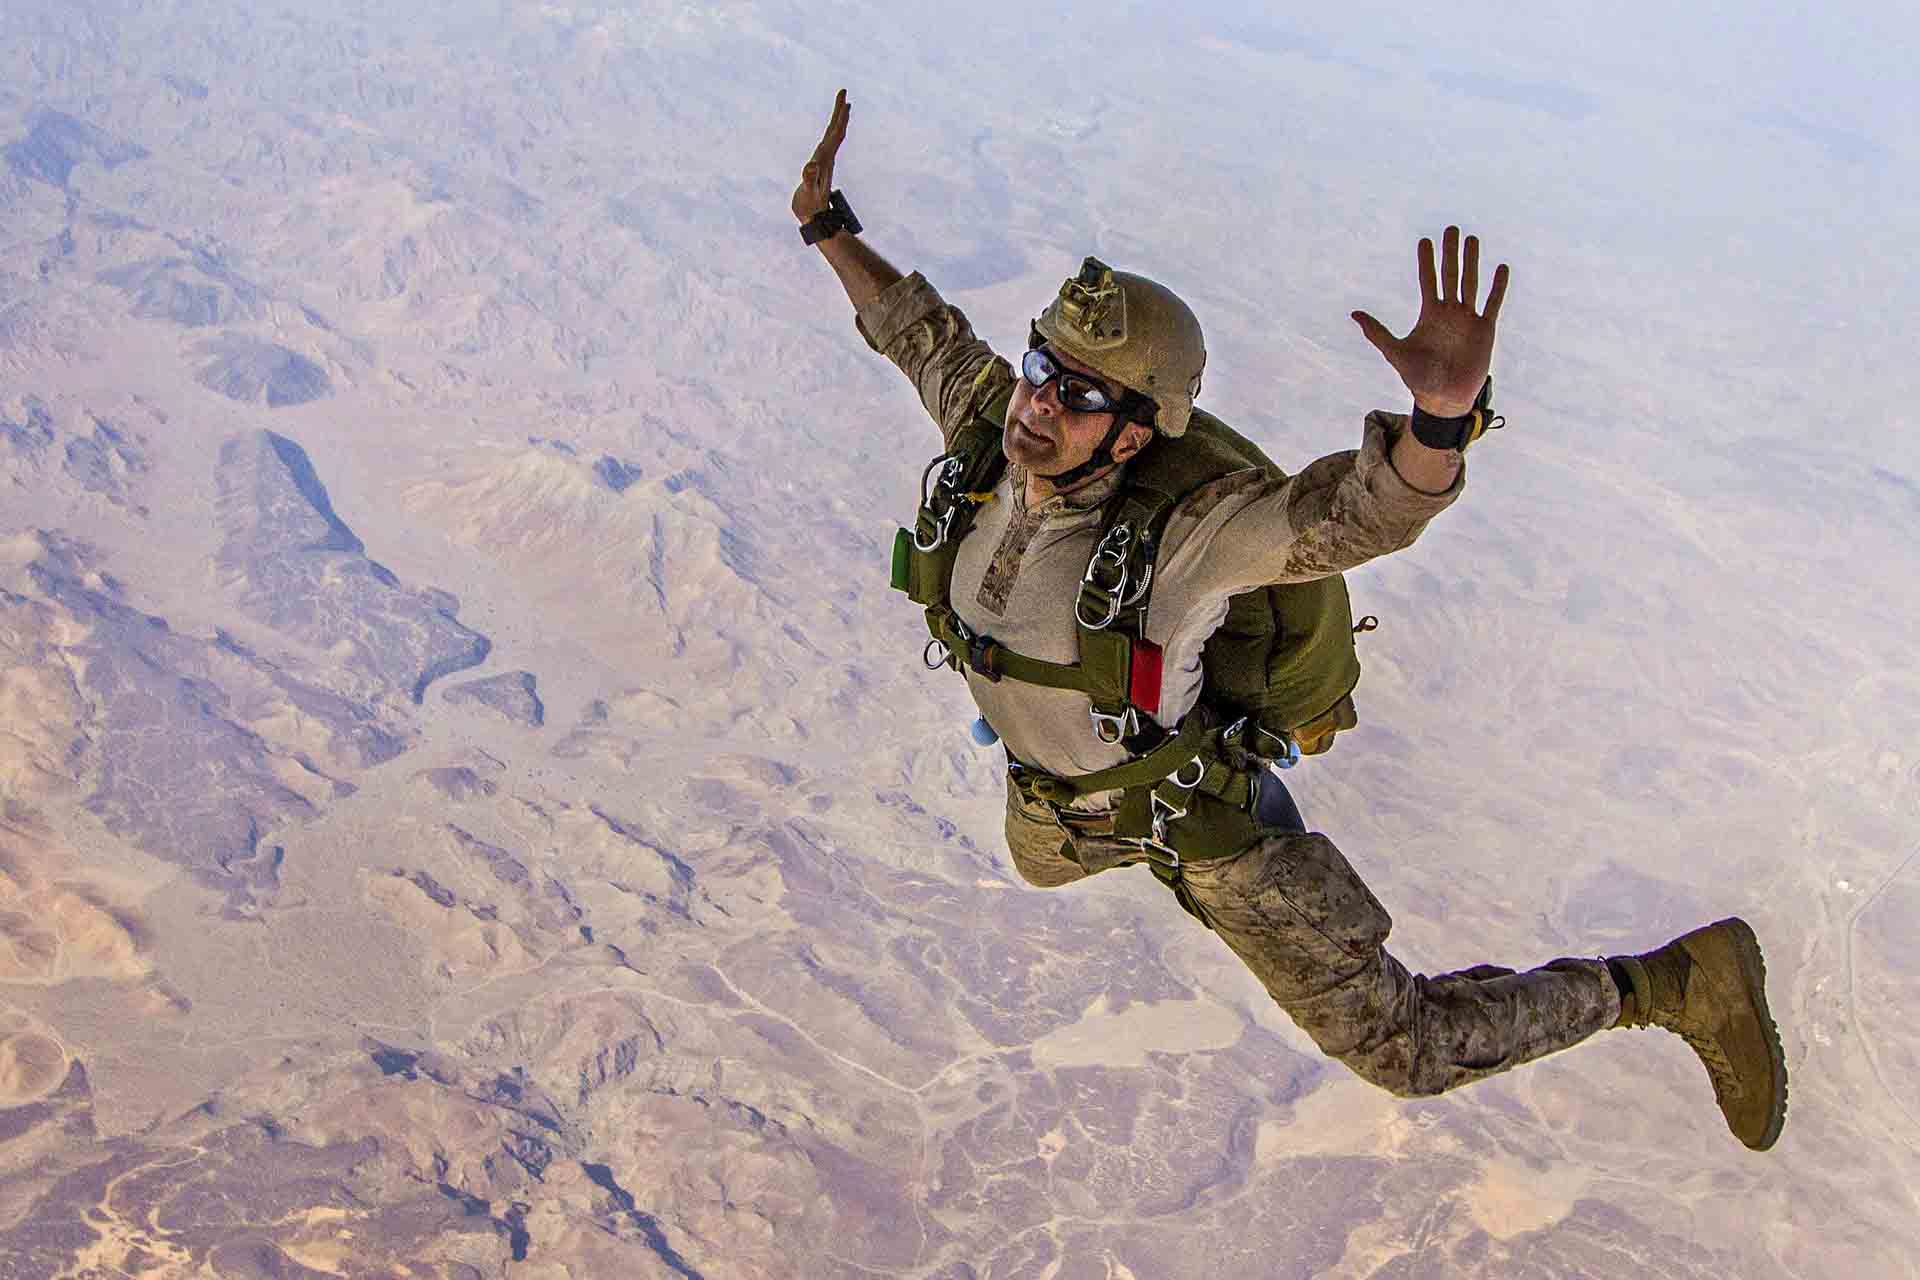 Soldiers Skydiving Latest HD Wallpaper Free Download. New HD